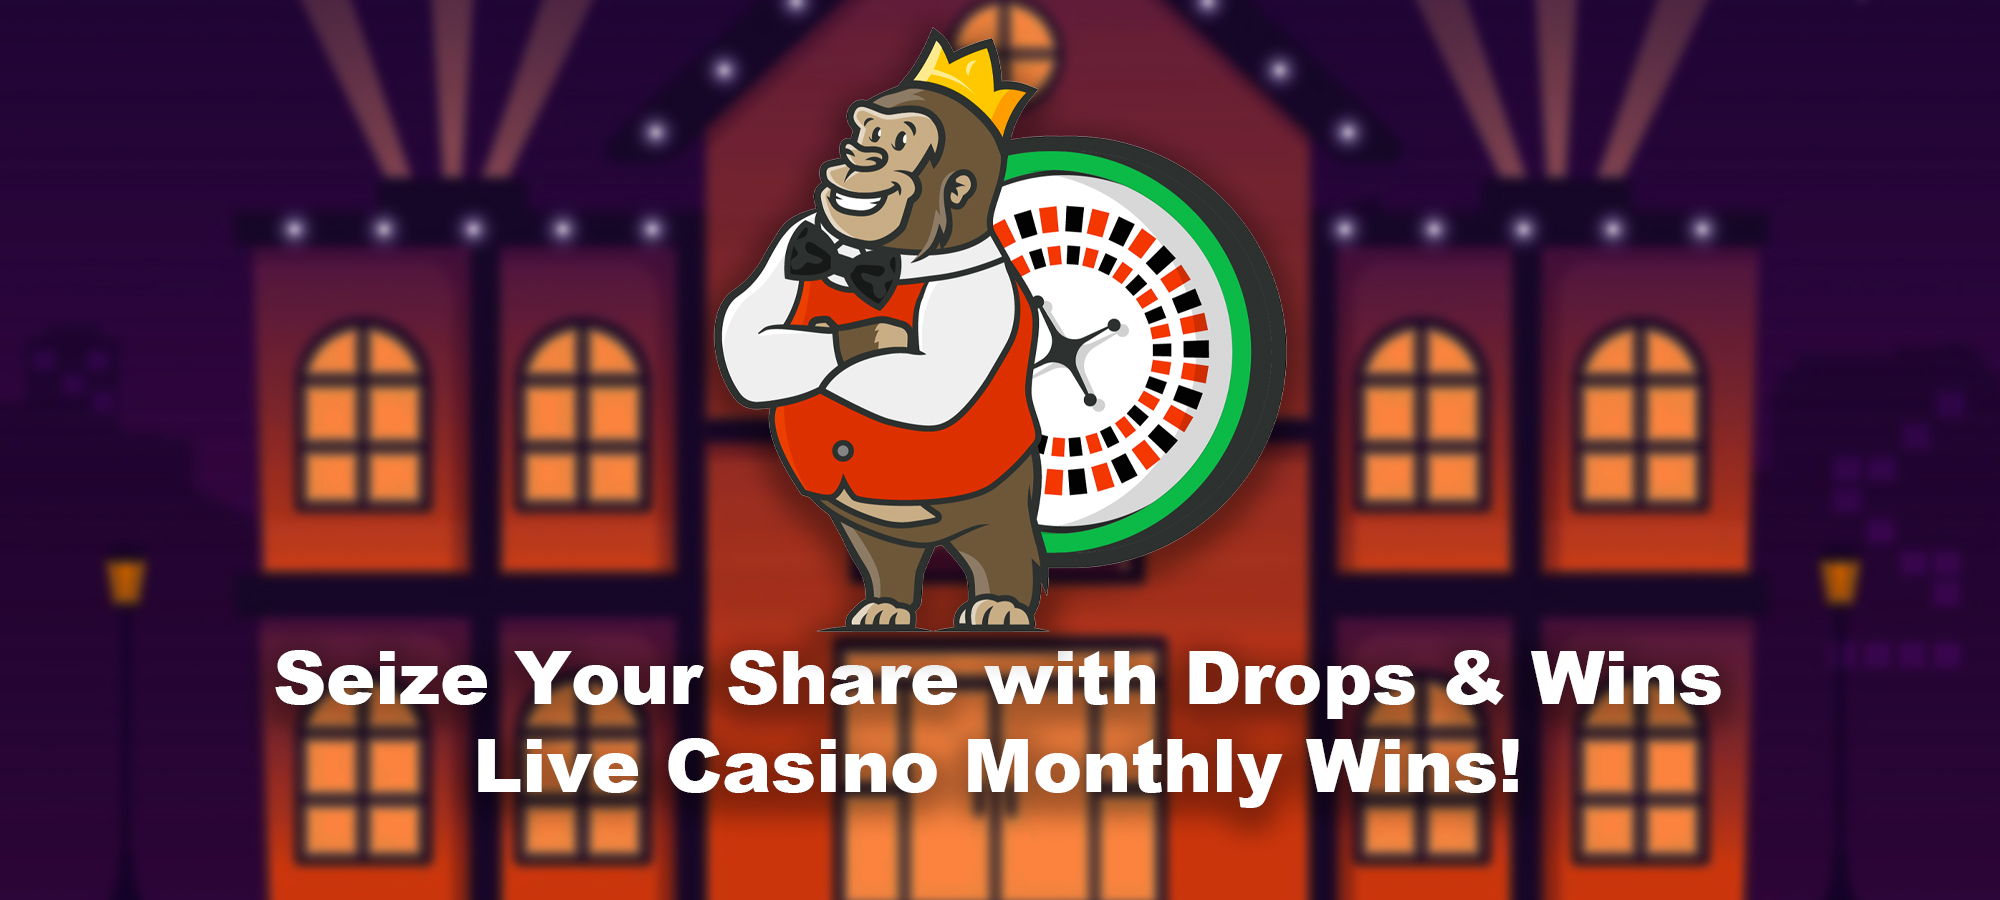 Claim Your Fortune in the Drops & Wins Live Casino Monthly Wins!